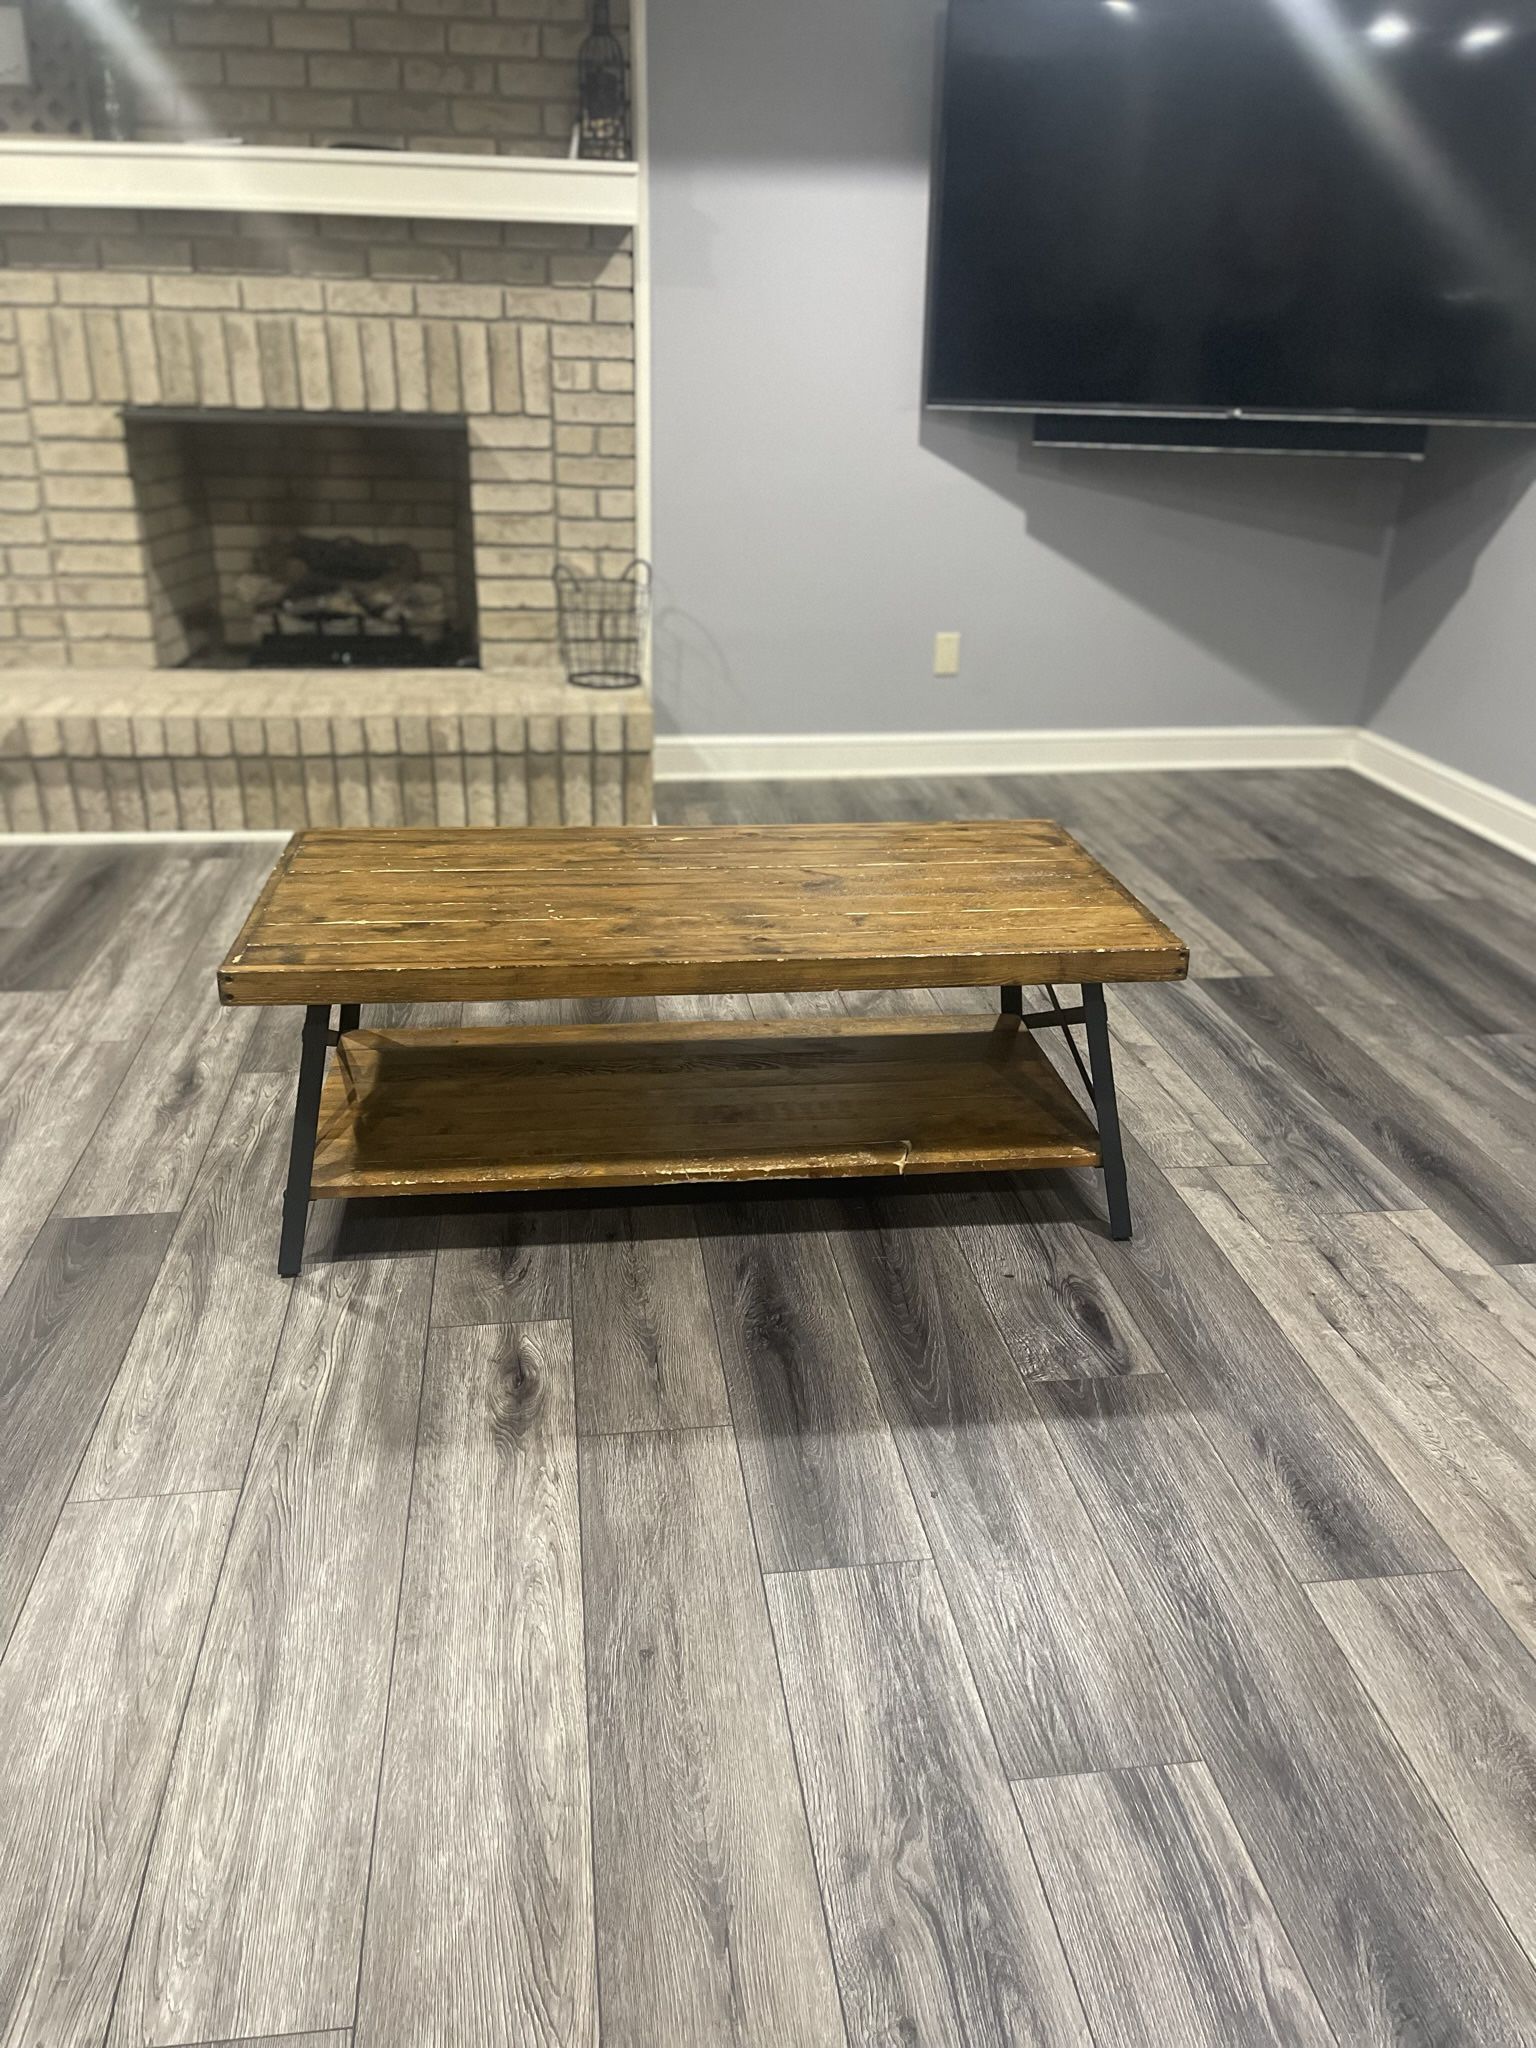 Two Stools (modern)  and Wood coffee Table (rustic) 